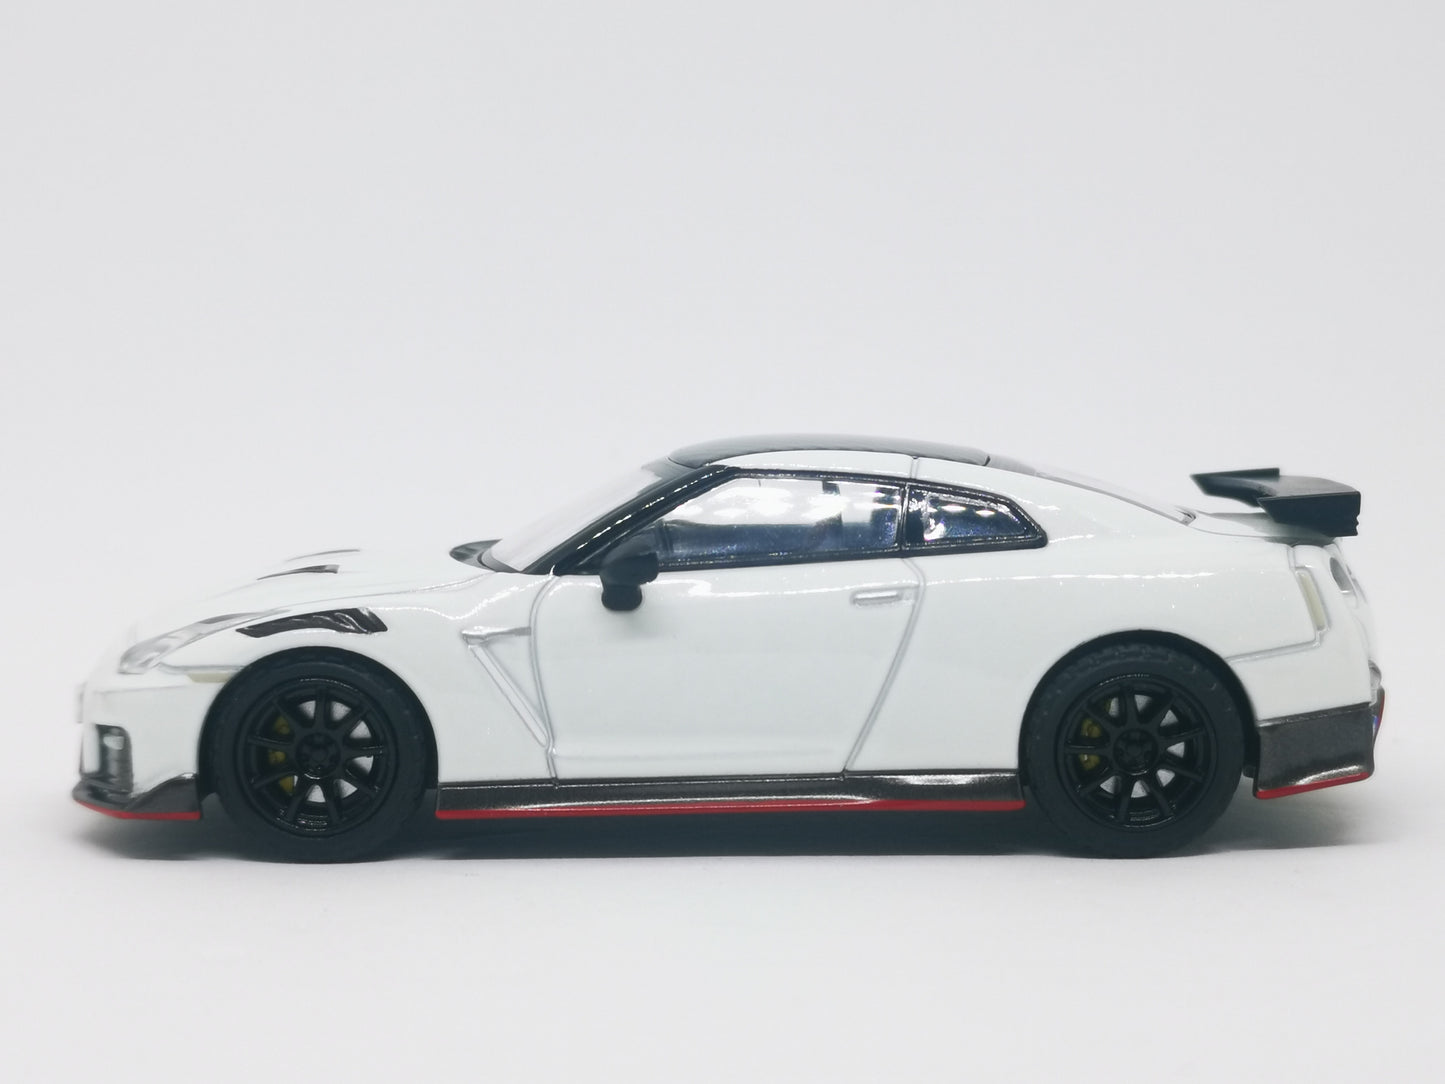 Tomica Limited Vintage Neo LV-N217a Nissan GT-R Nismo 2020 Model White